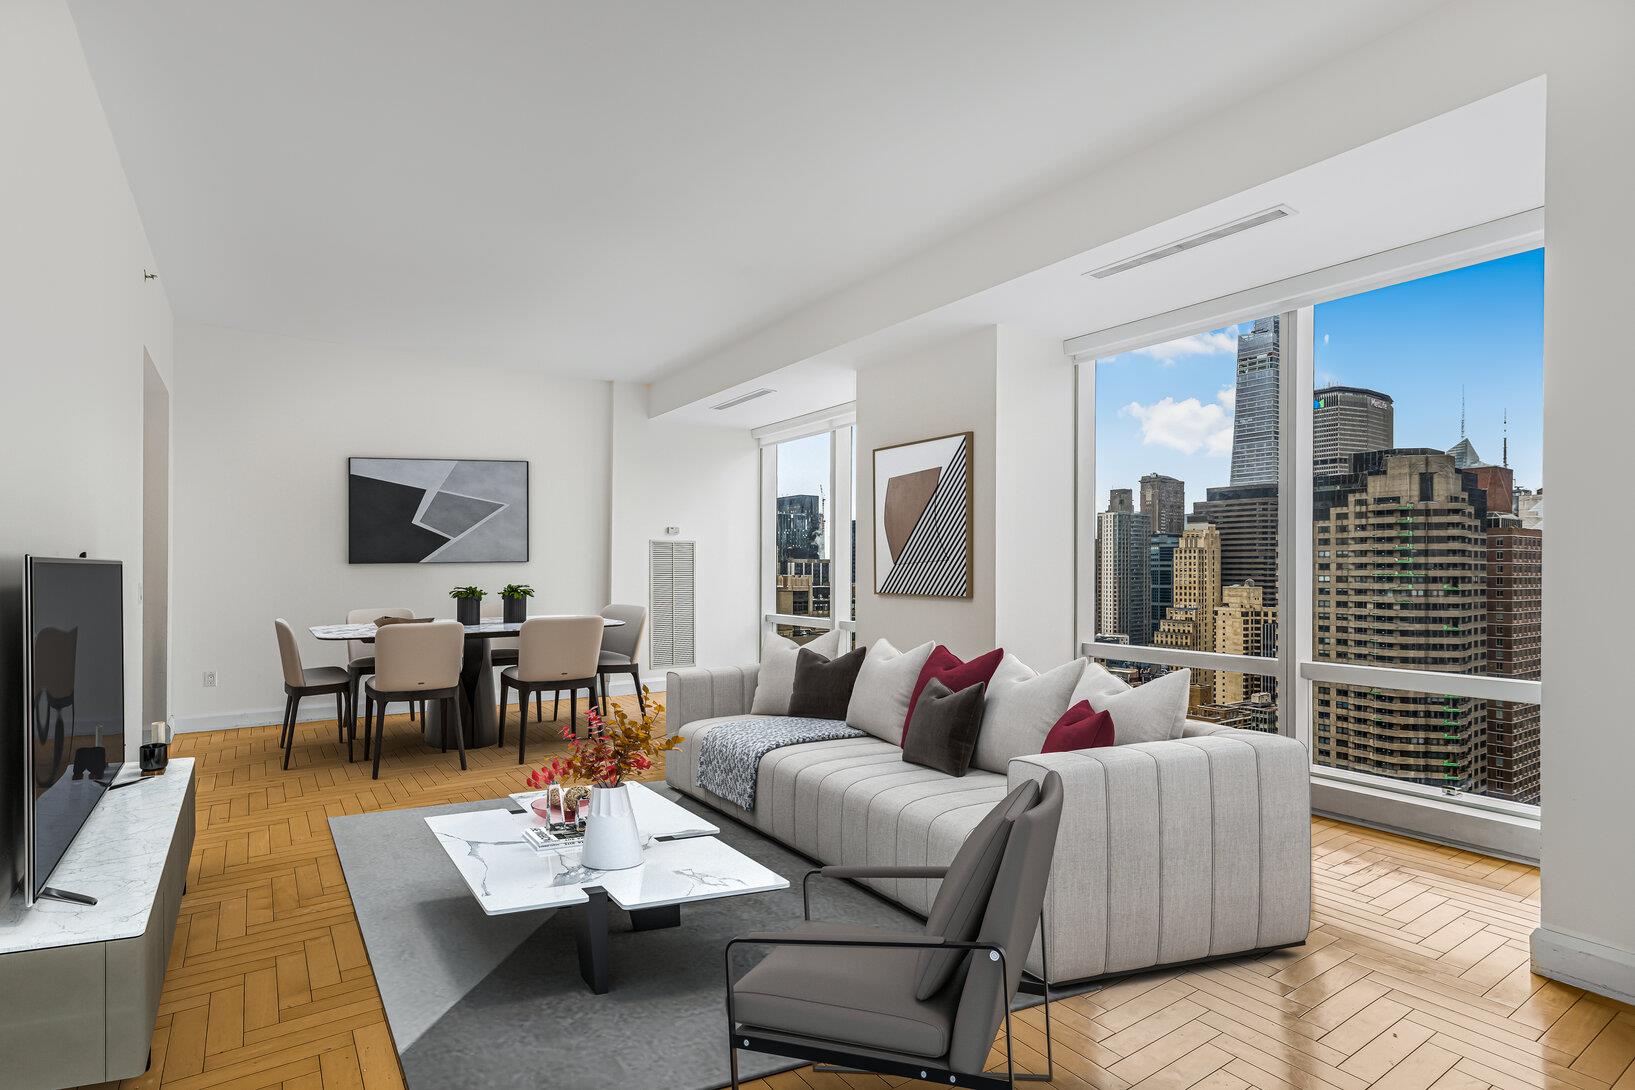 845 United Nations Plaza 41-D, Turtle Bay, Midtown East, NYC - 2 Bedrooms  
2.5 Bathrooms  
4 Rooms - 